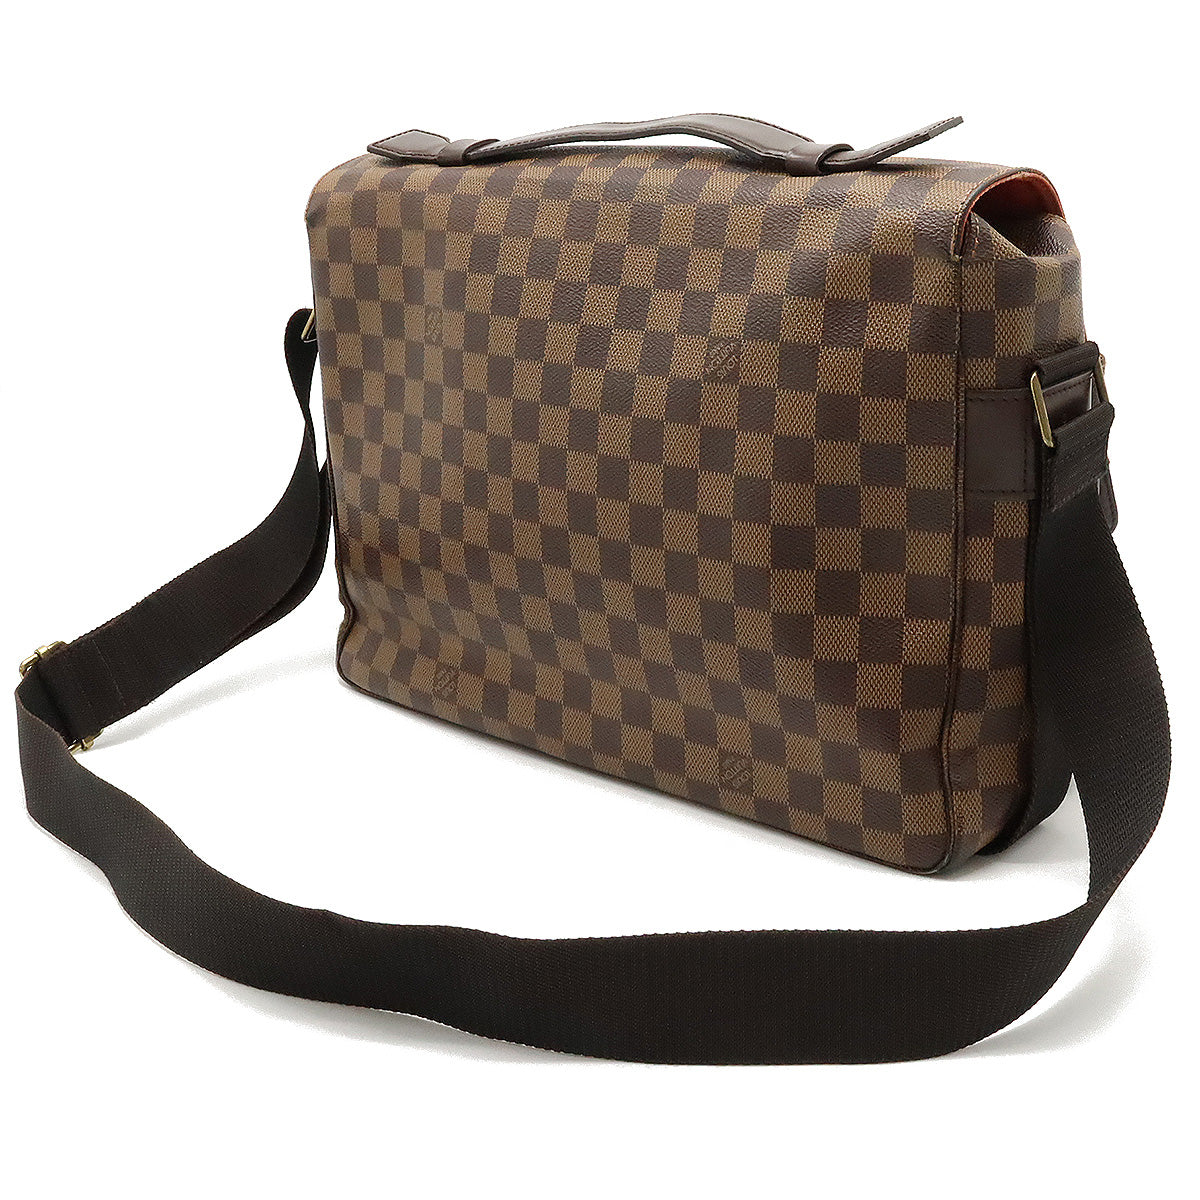 Damier Ebene Leather Broadway Messenger Bag (Authentic Pre-owned)